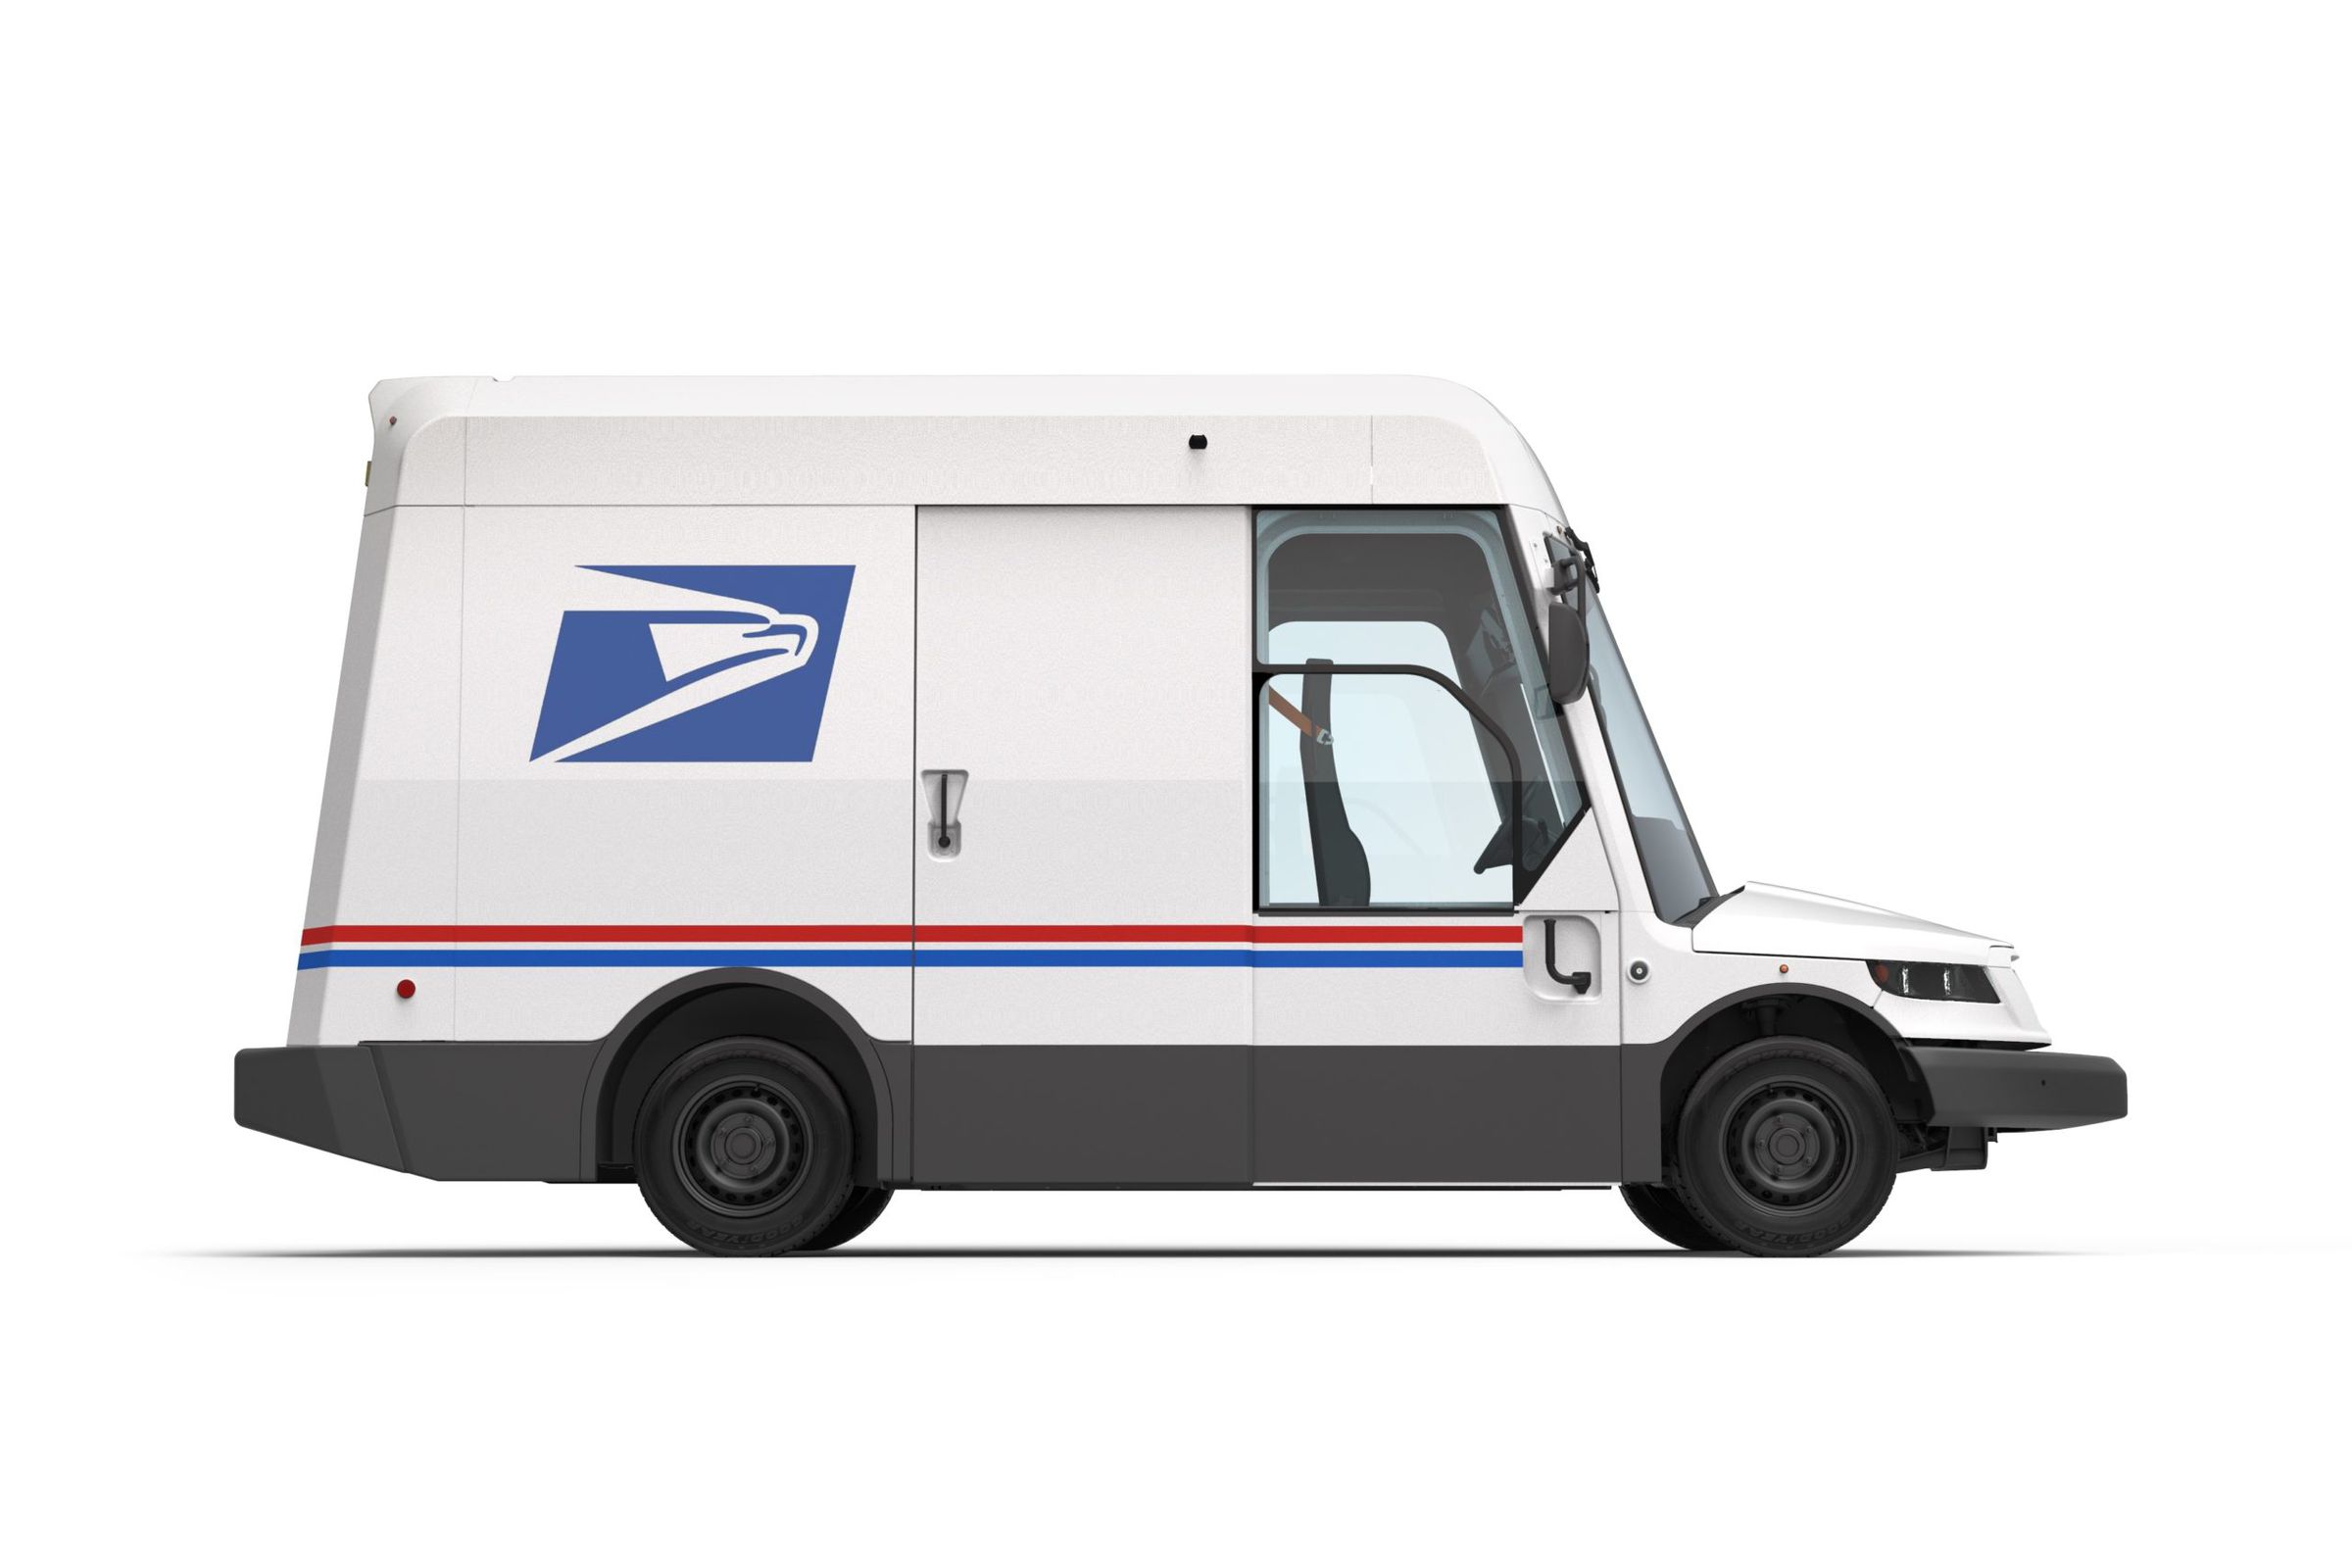 The Oshkosh-designed mail truck. The new fleet will only be 10 percent electric, though the vehicles can supposedly be converted.